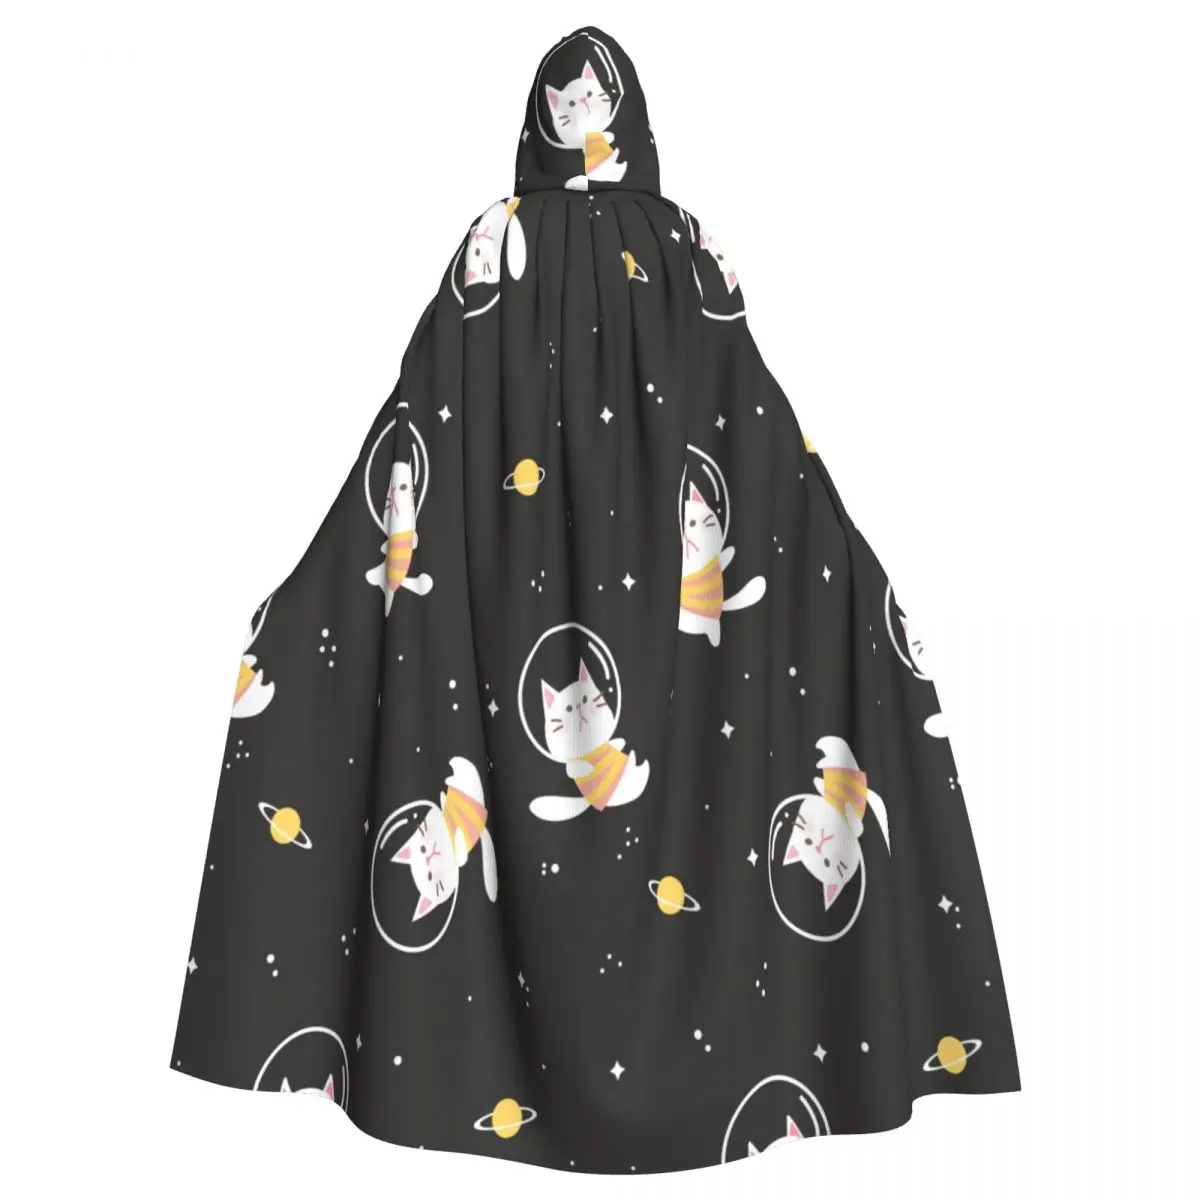 

Unisex Adult Cartoon Cat Floating In The Space Area With Star Cloak with Hood Long Witch Costume Cosplay